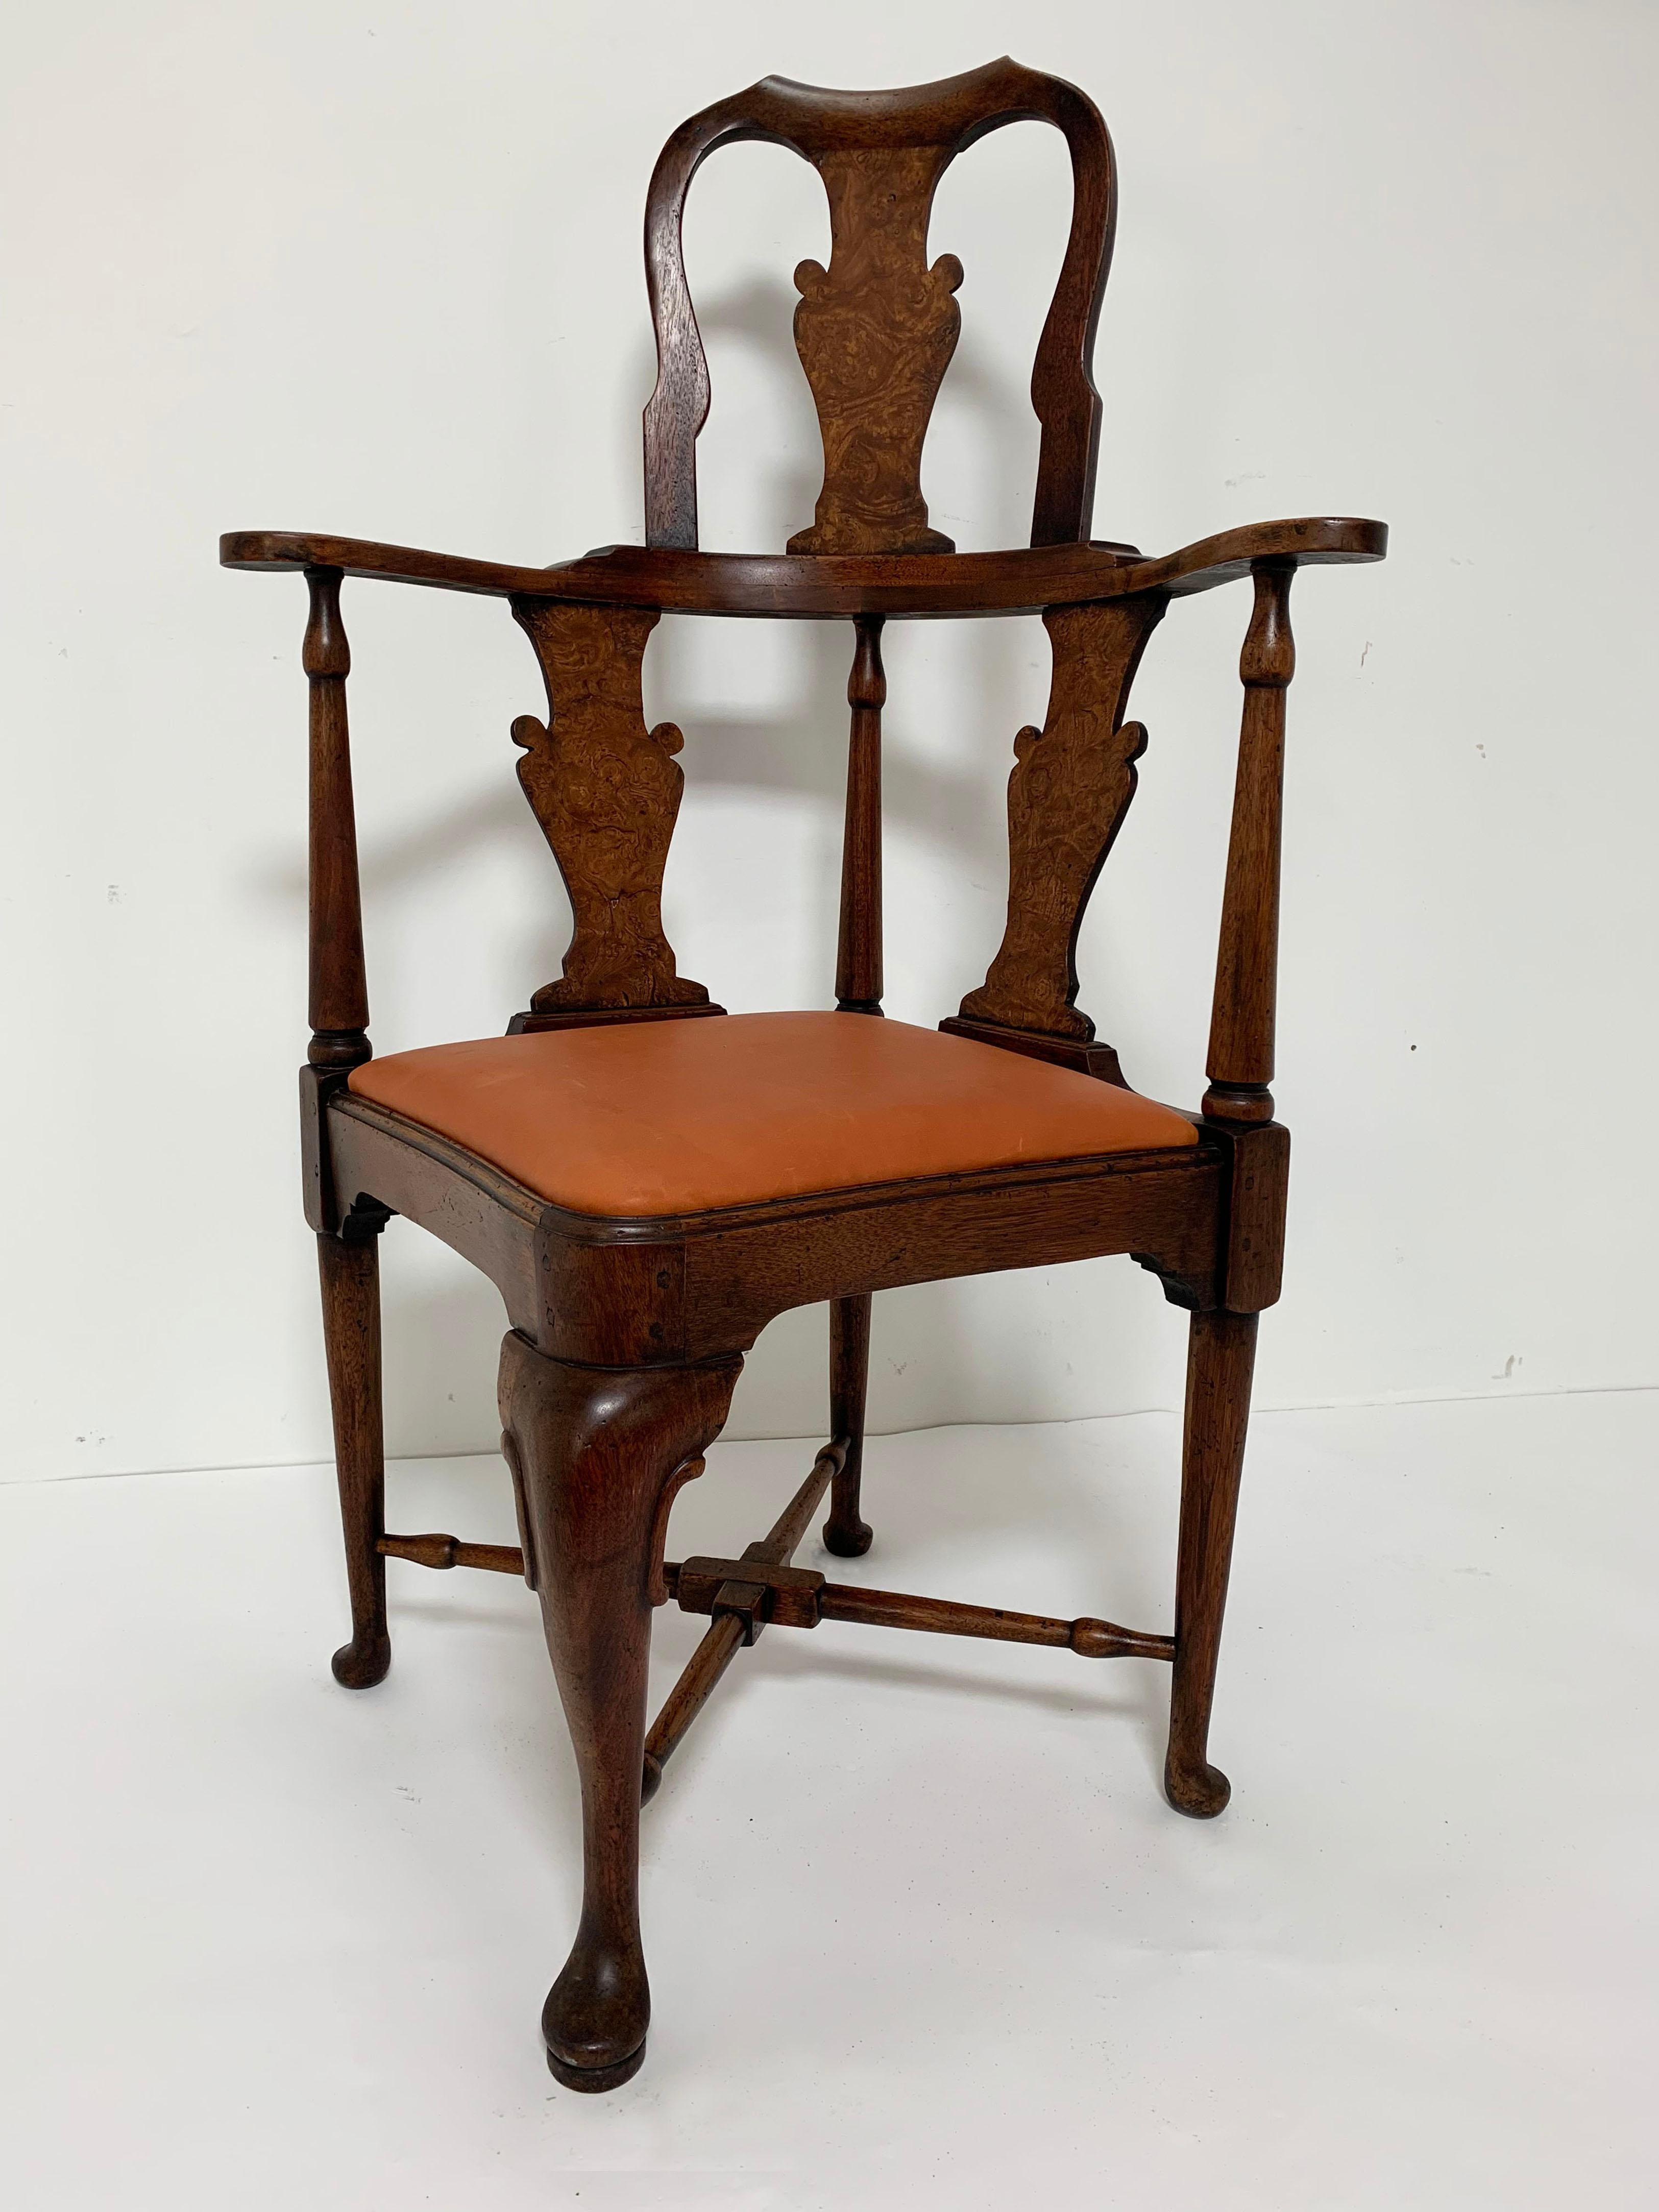 18th century, circa 1750, English Queen Anne high-back corner chair in walnut with vasiform splats of burl wood. Upholstered in cordovan leather.
   
  